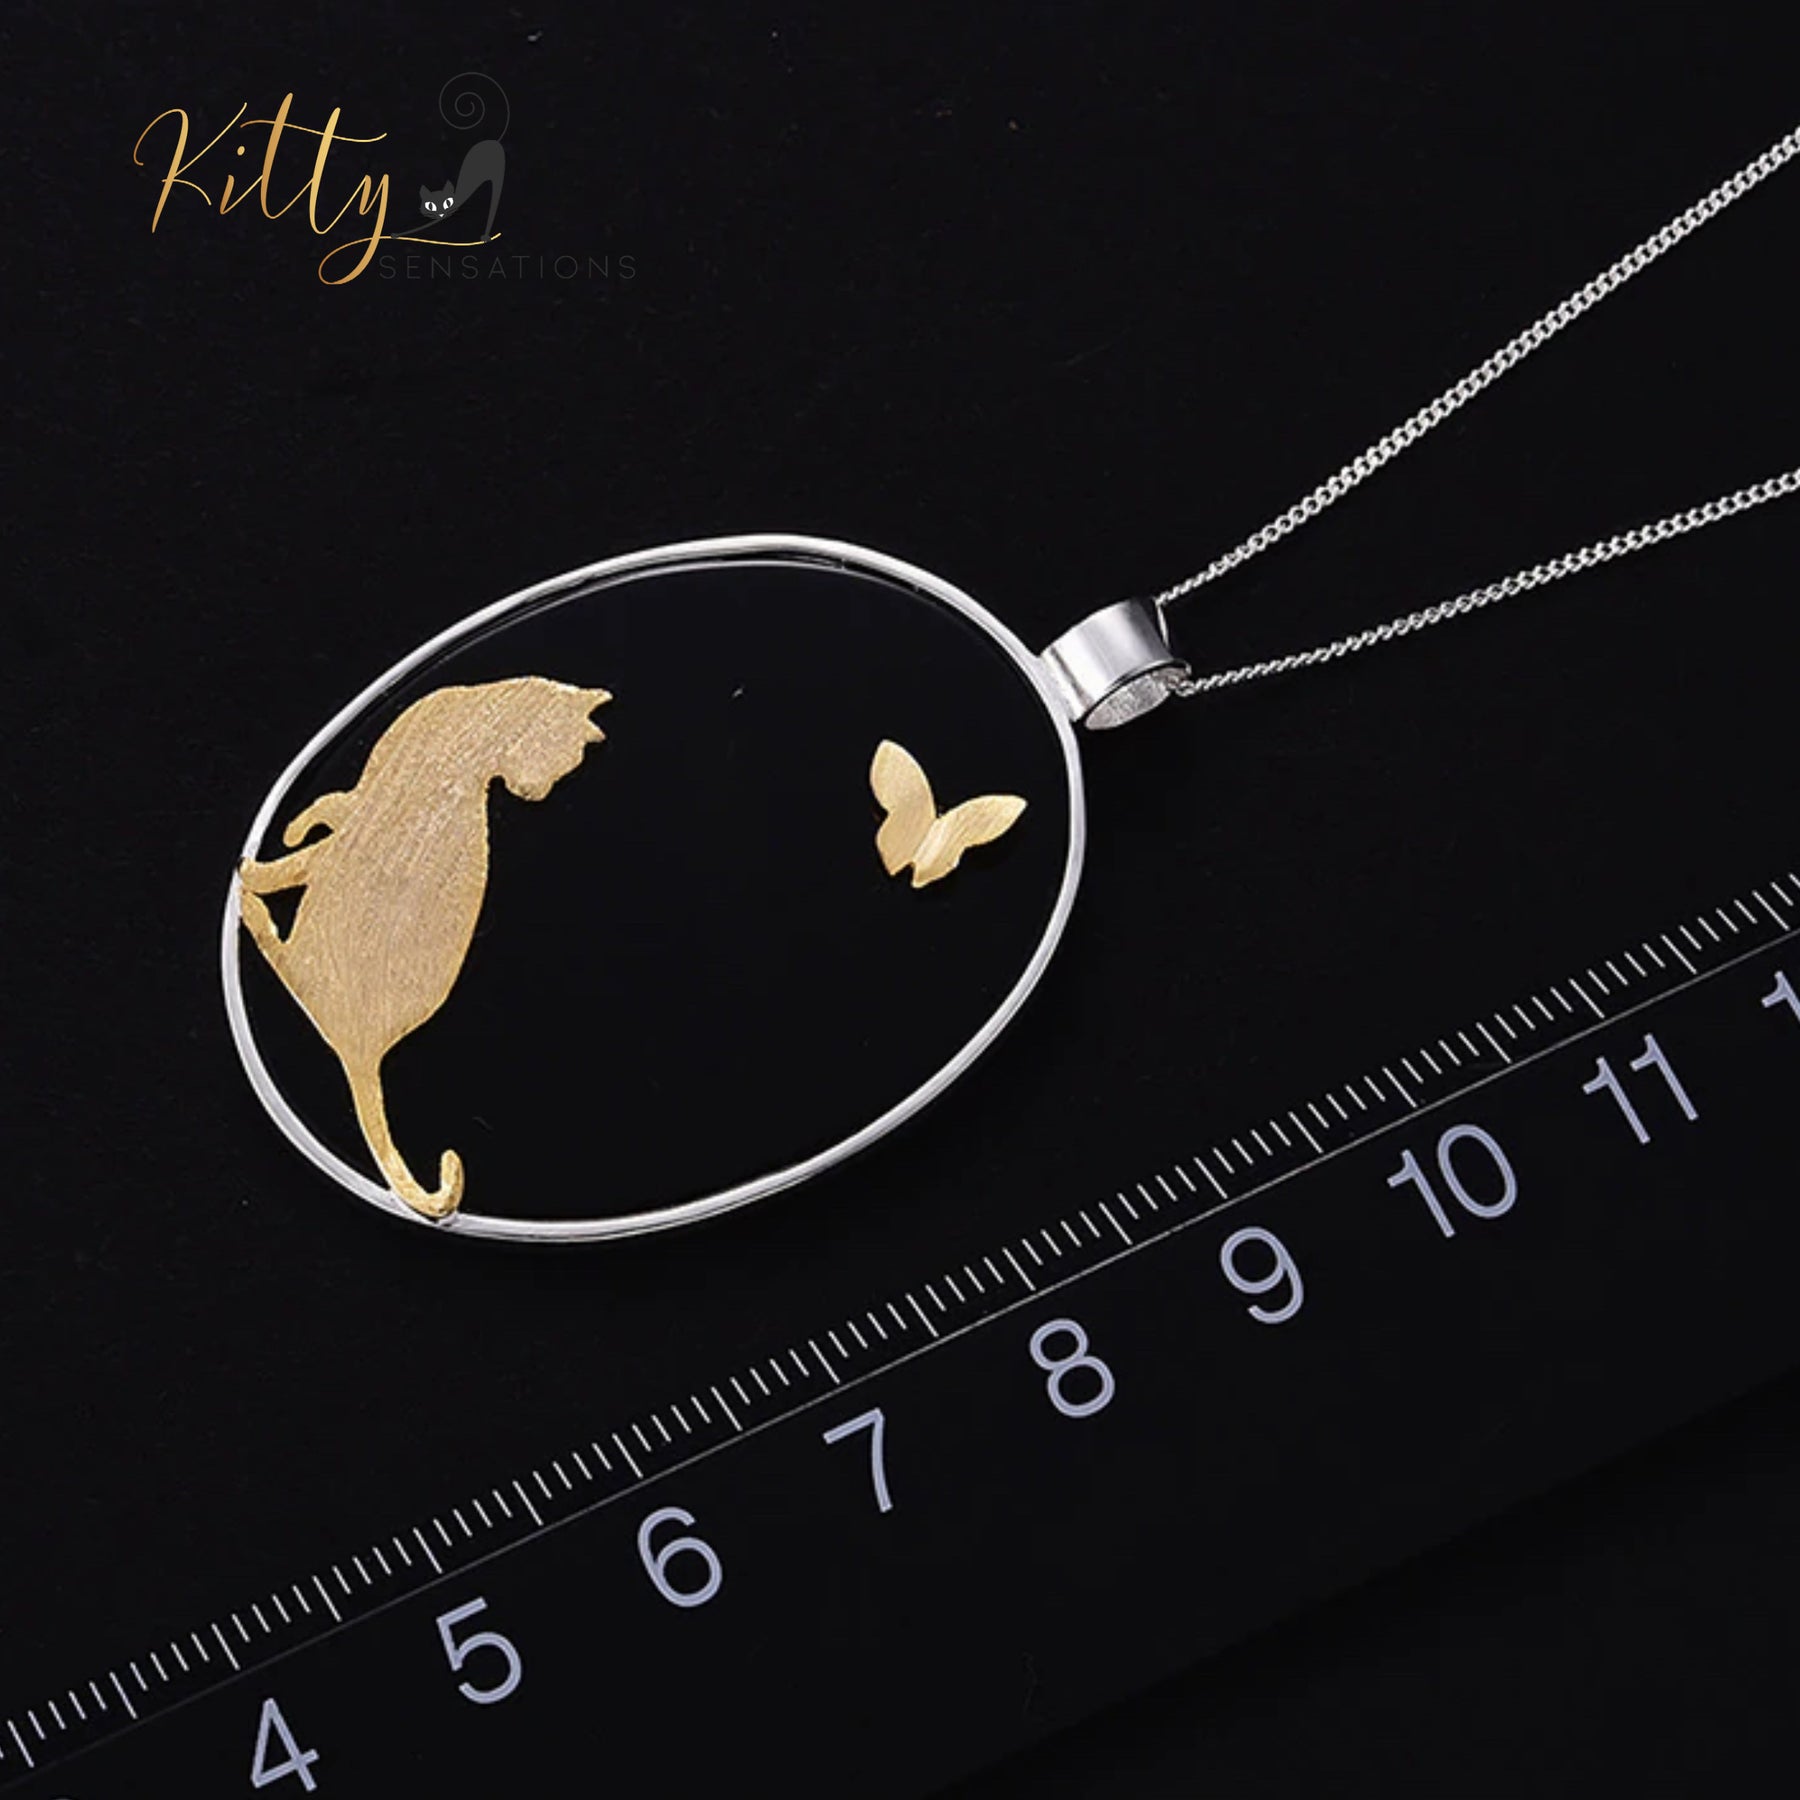 www.KittySensations.com:Gold Kitty on Natural Agate Necklace in Solid 925 Sterling Silver (Gold Plated) - Pendant Only ($241.77): https://www.kittysensations.com/products/gold-kitty-on-natural-agate-necklace-in-solid-925-sterling-silver